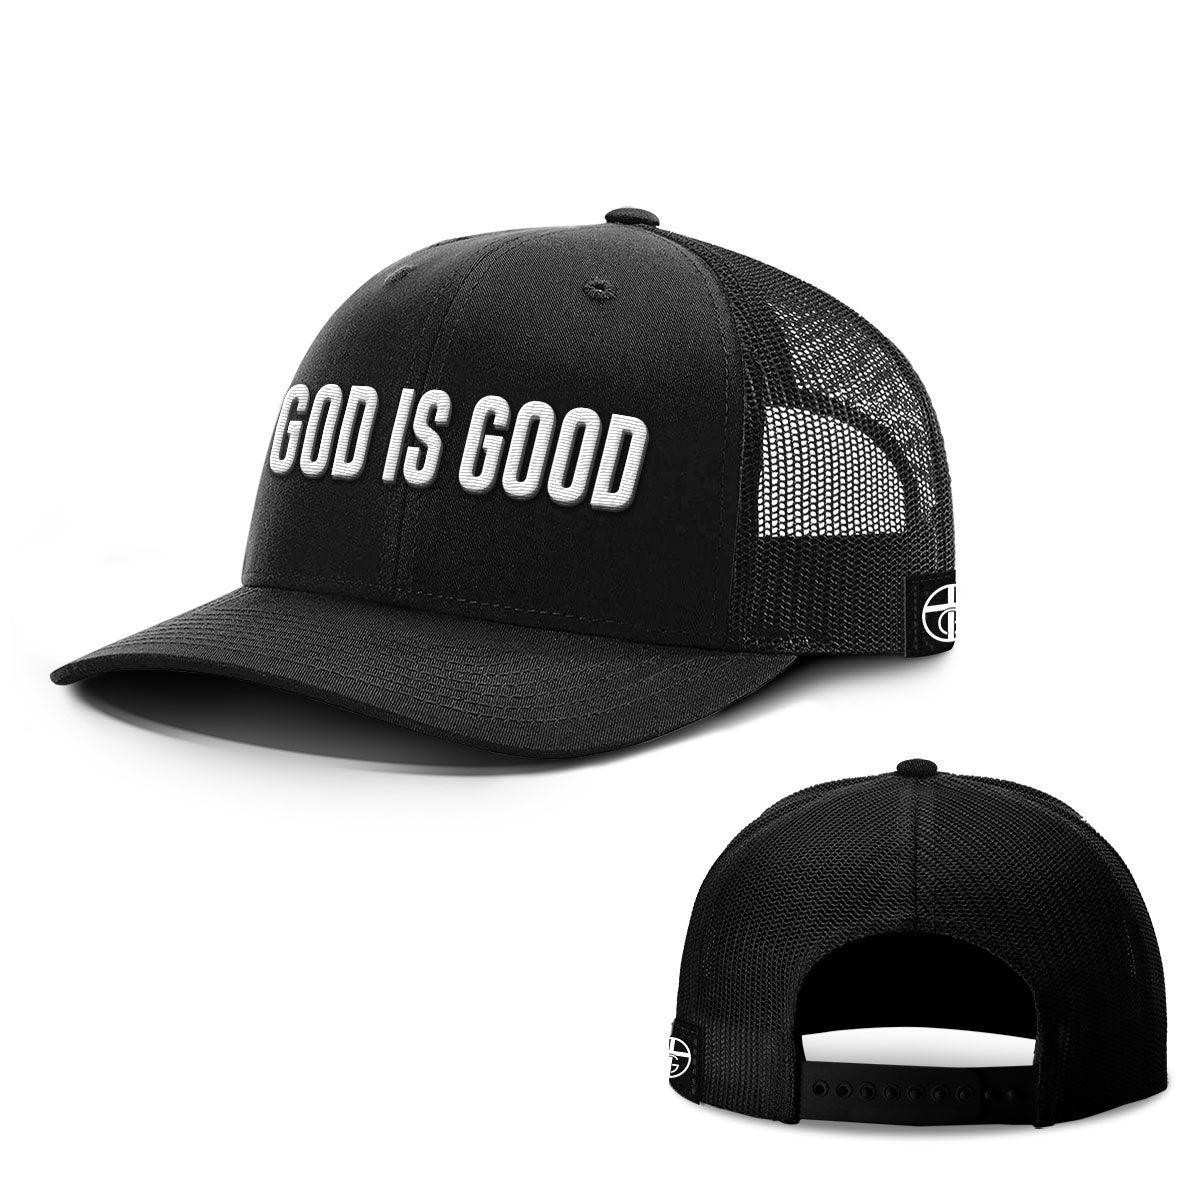 God Is Good Hats - Our True God